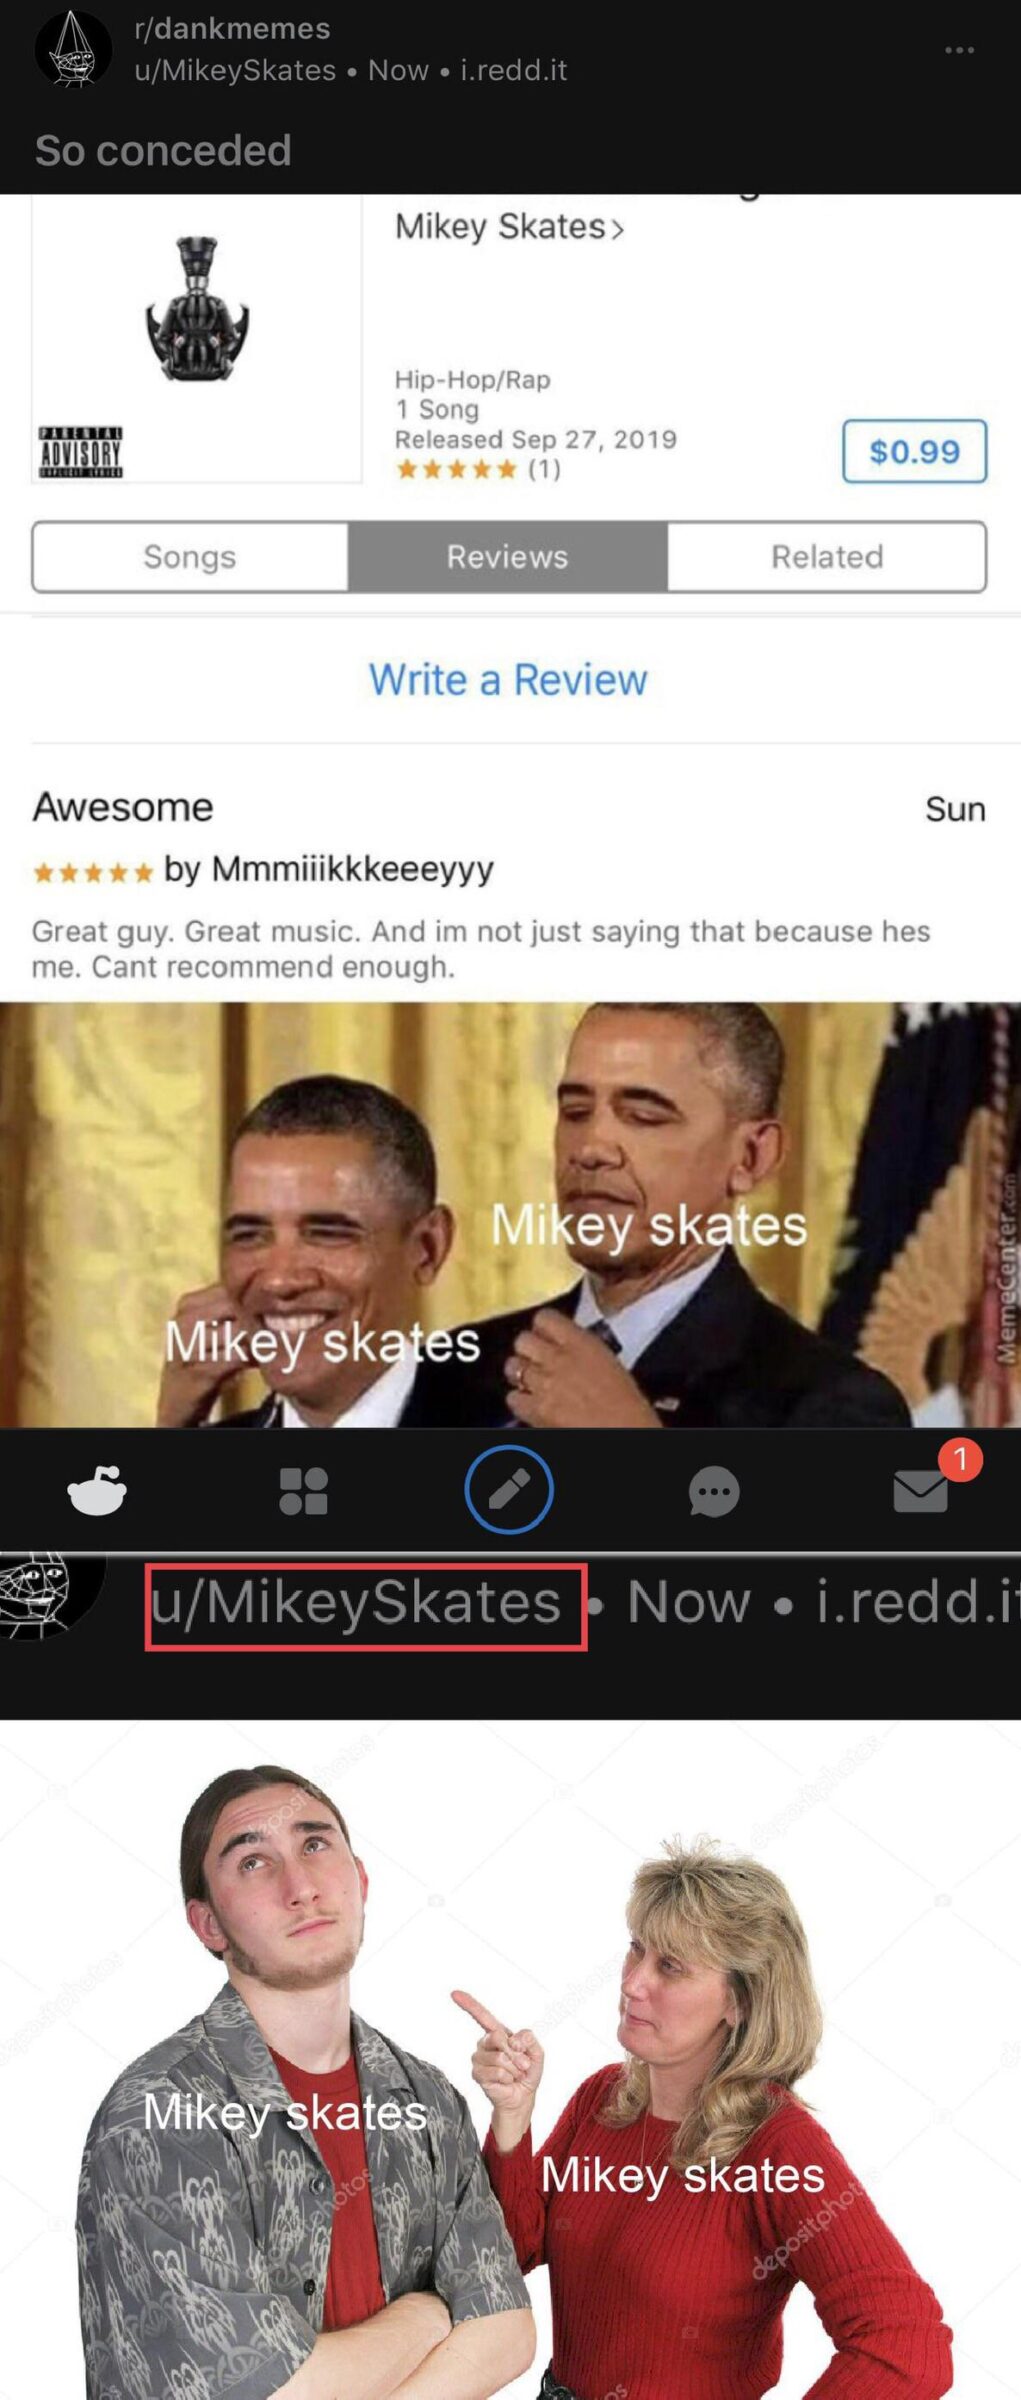 Dank, MikeySkates, Skates, Mikey Skates, Mikey Dank Memes Dank, MikeySkates, Skates, Mikey Skates, Mikey text: r/dankmemes u/MikeySkates • Now • i.redd.it So conceded Songs Awesome Mikey Skates) Hip-Hop/Rap 1 Song Released sep 27, 2019 Reviews Write a Review $0.99 Sun by Mmmiiikkkeeeyyy Great guy. Great music. And im not just saying that because hes me. Cant recommend enough. ey sk s ikeysk kat • i.redd.i Mikey skates 